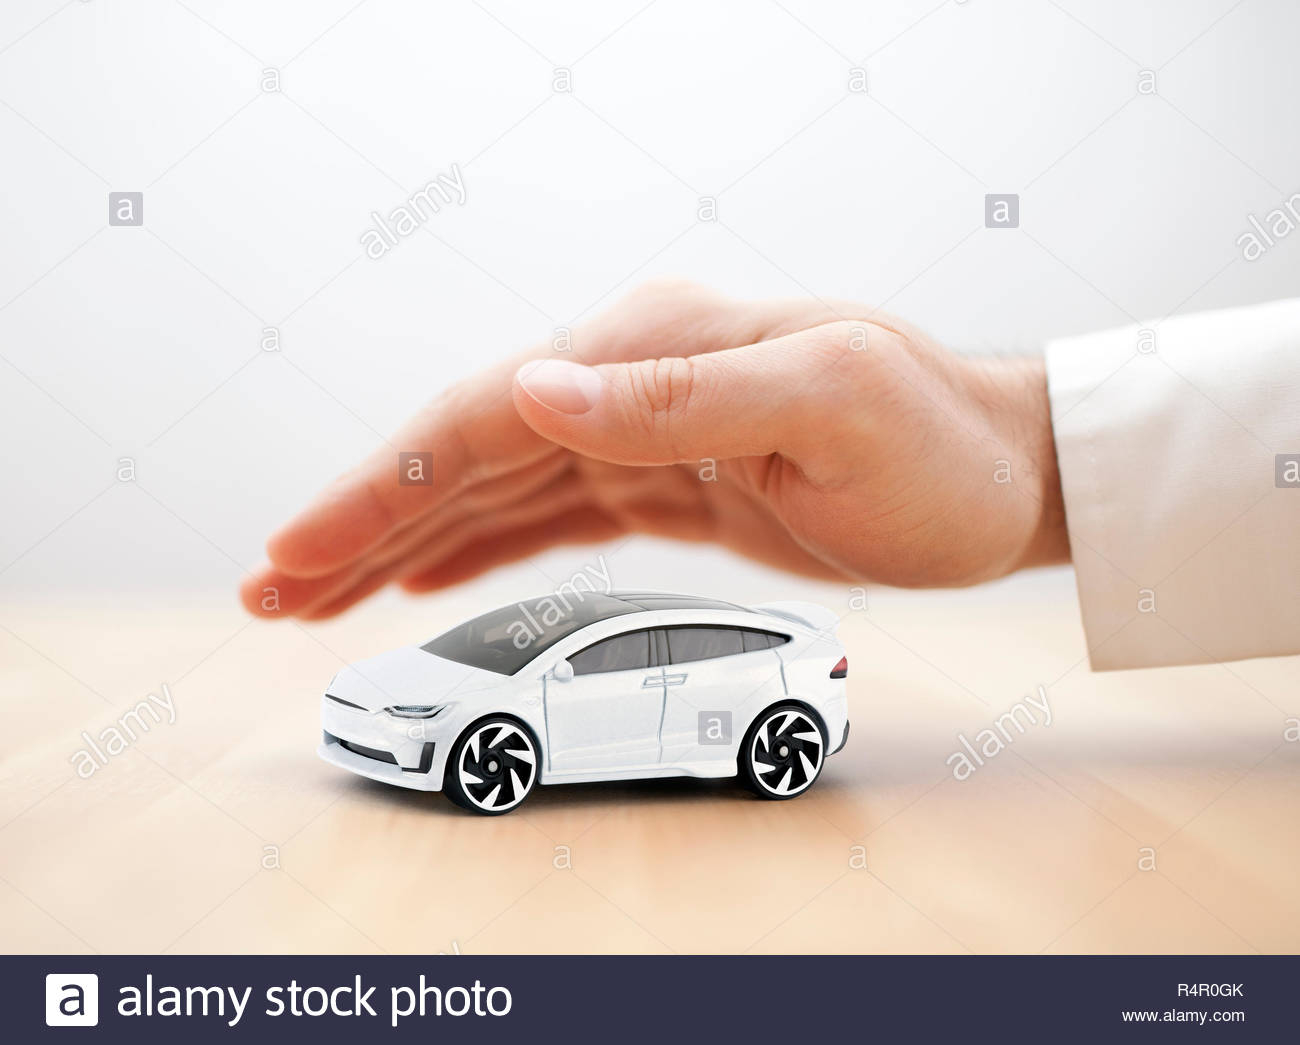 Car Insurance Stock Photo 226698771 Alamy intended for size 1300 X 1045